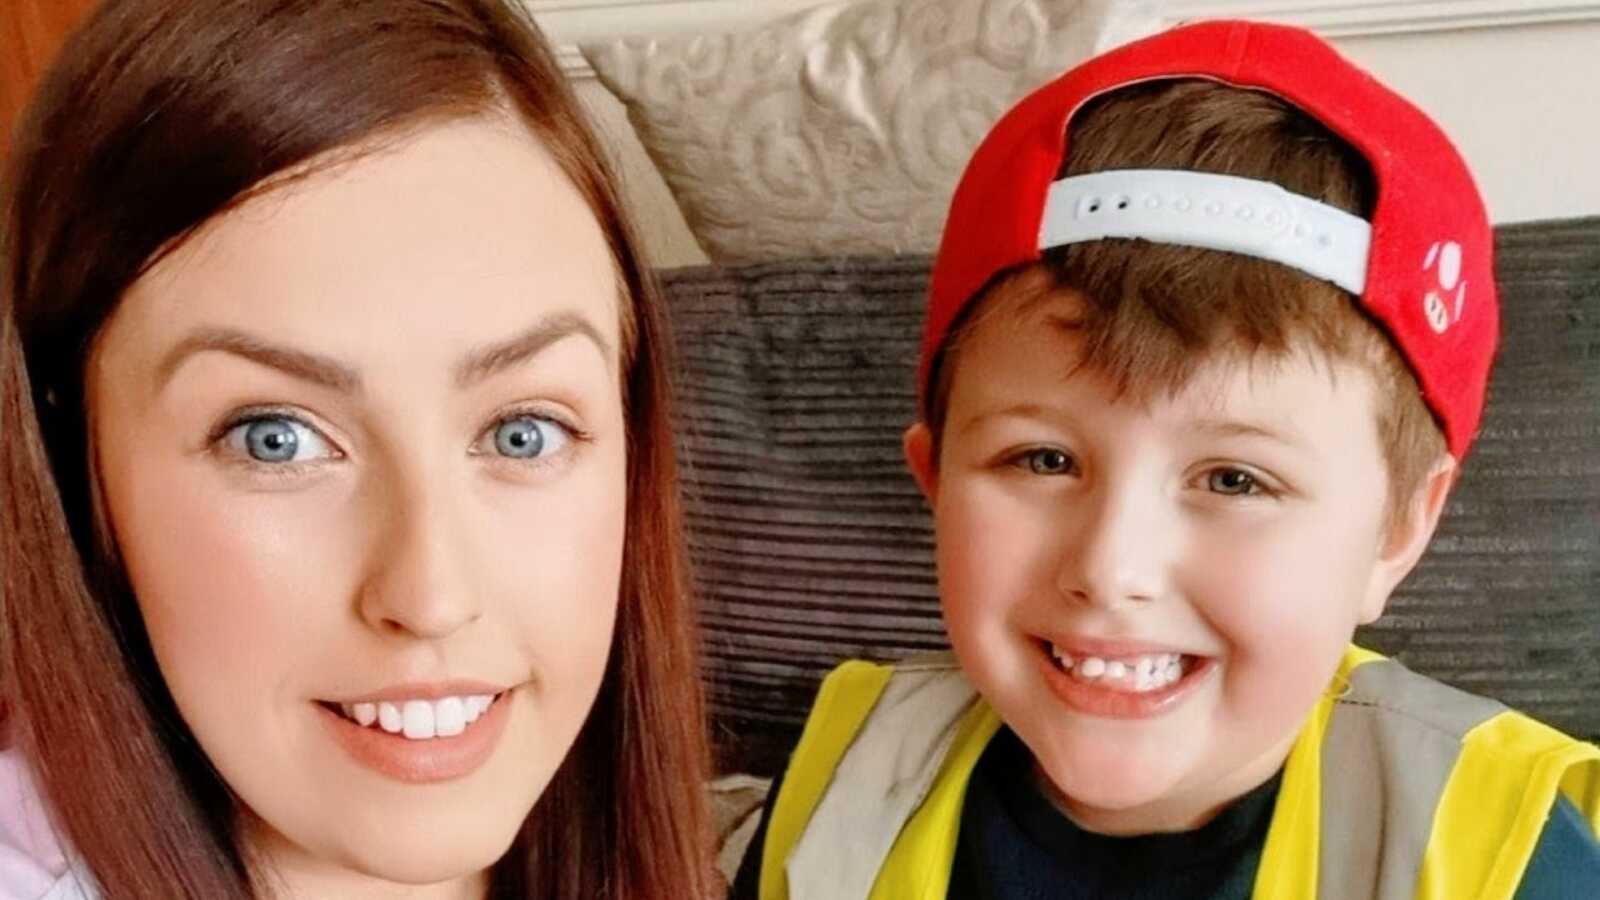 Mom and son with autism who is wearing red hat backwards